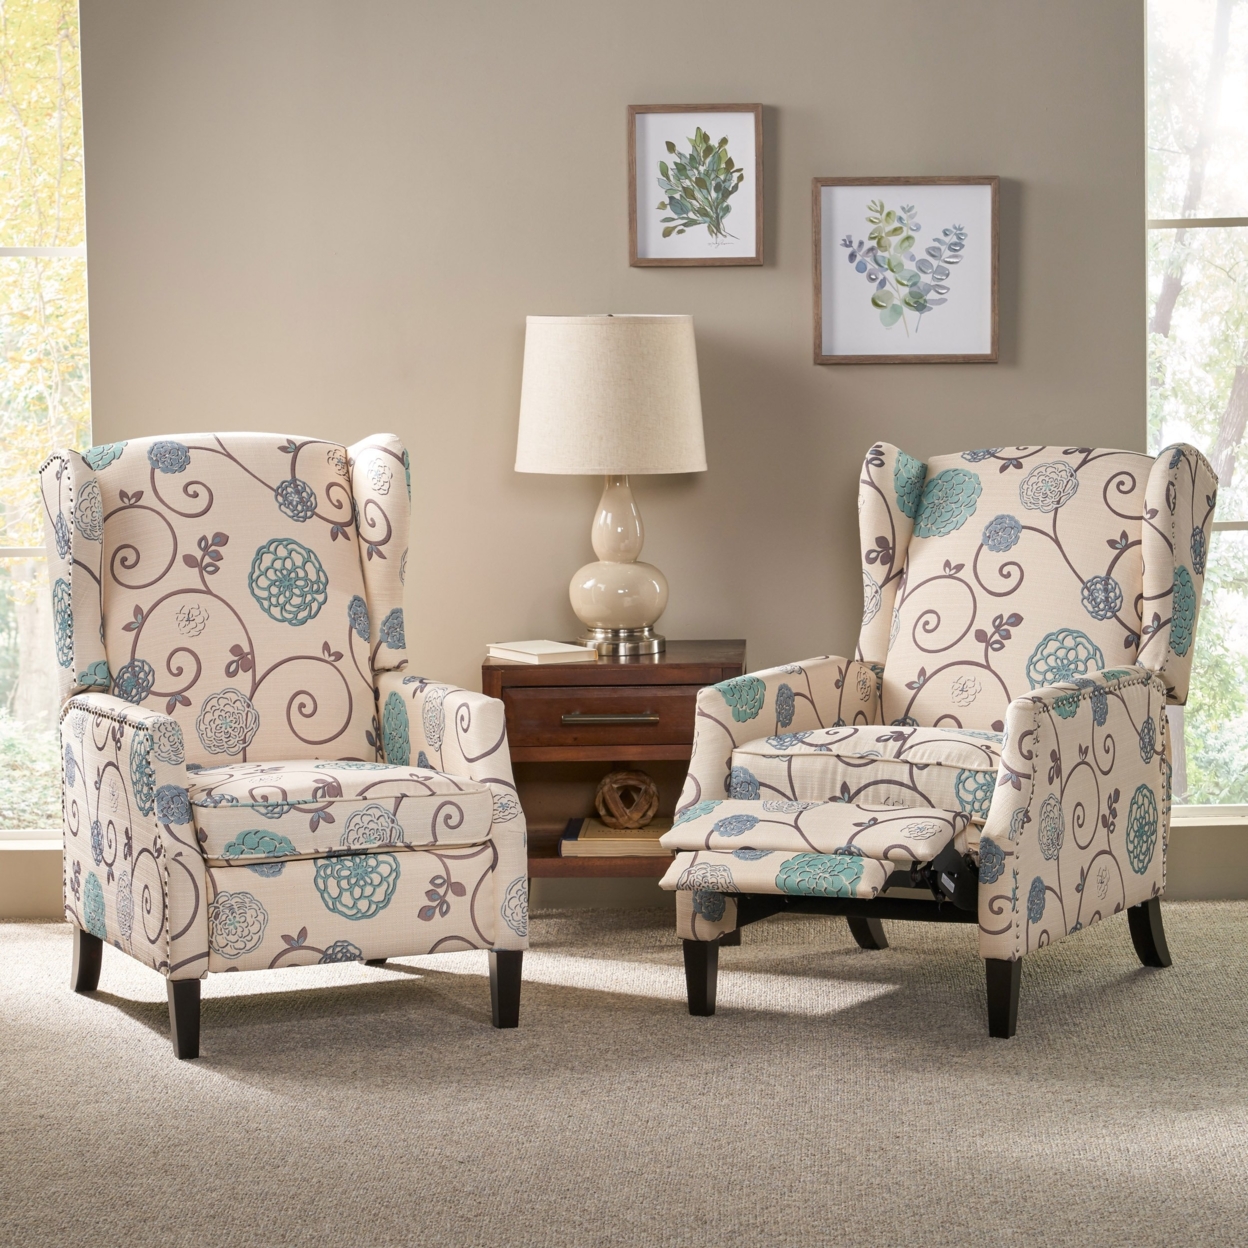 Weyland Contemporary Fabric Recliner (Set Of 2) - Light Beige With Blue Floral